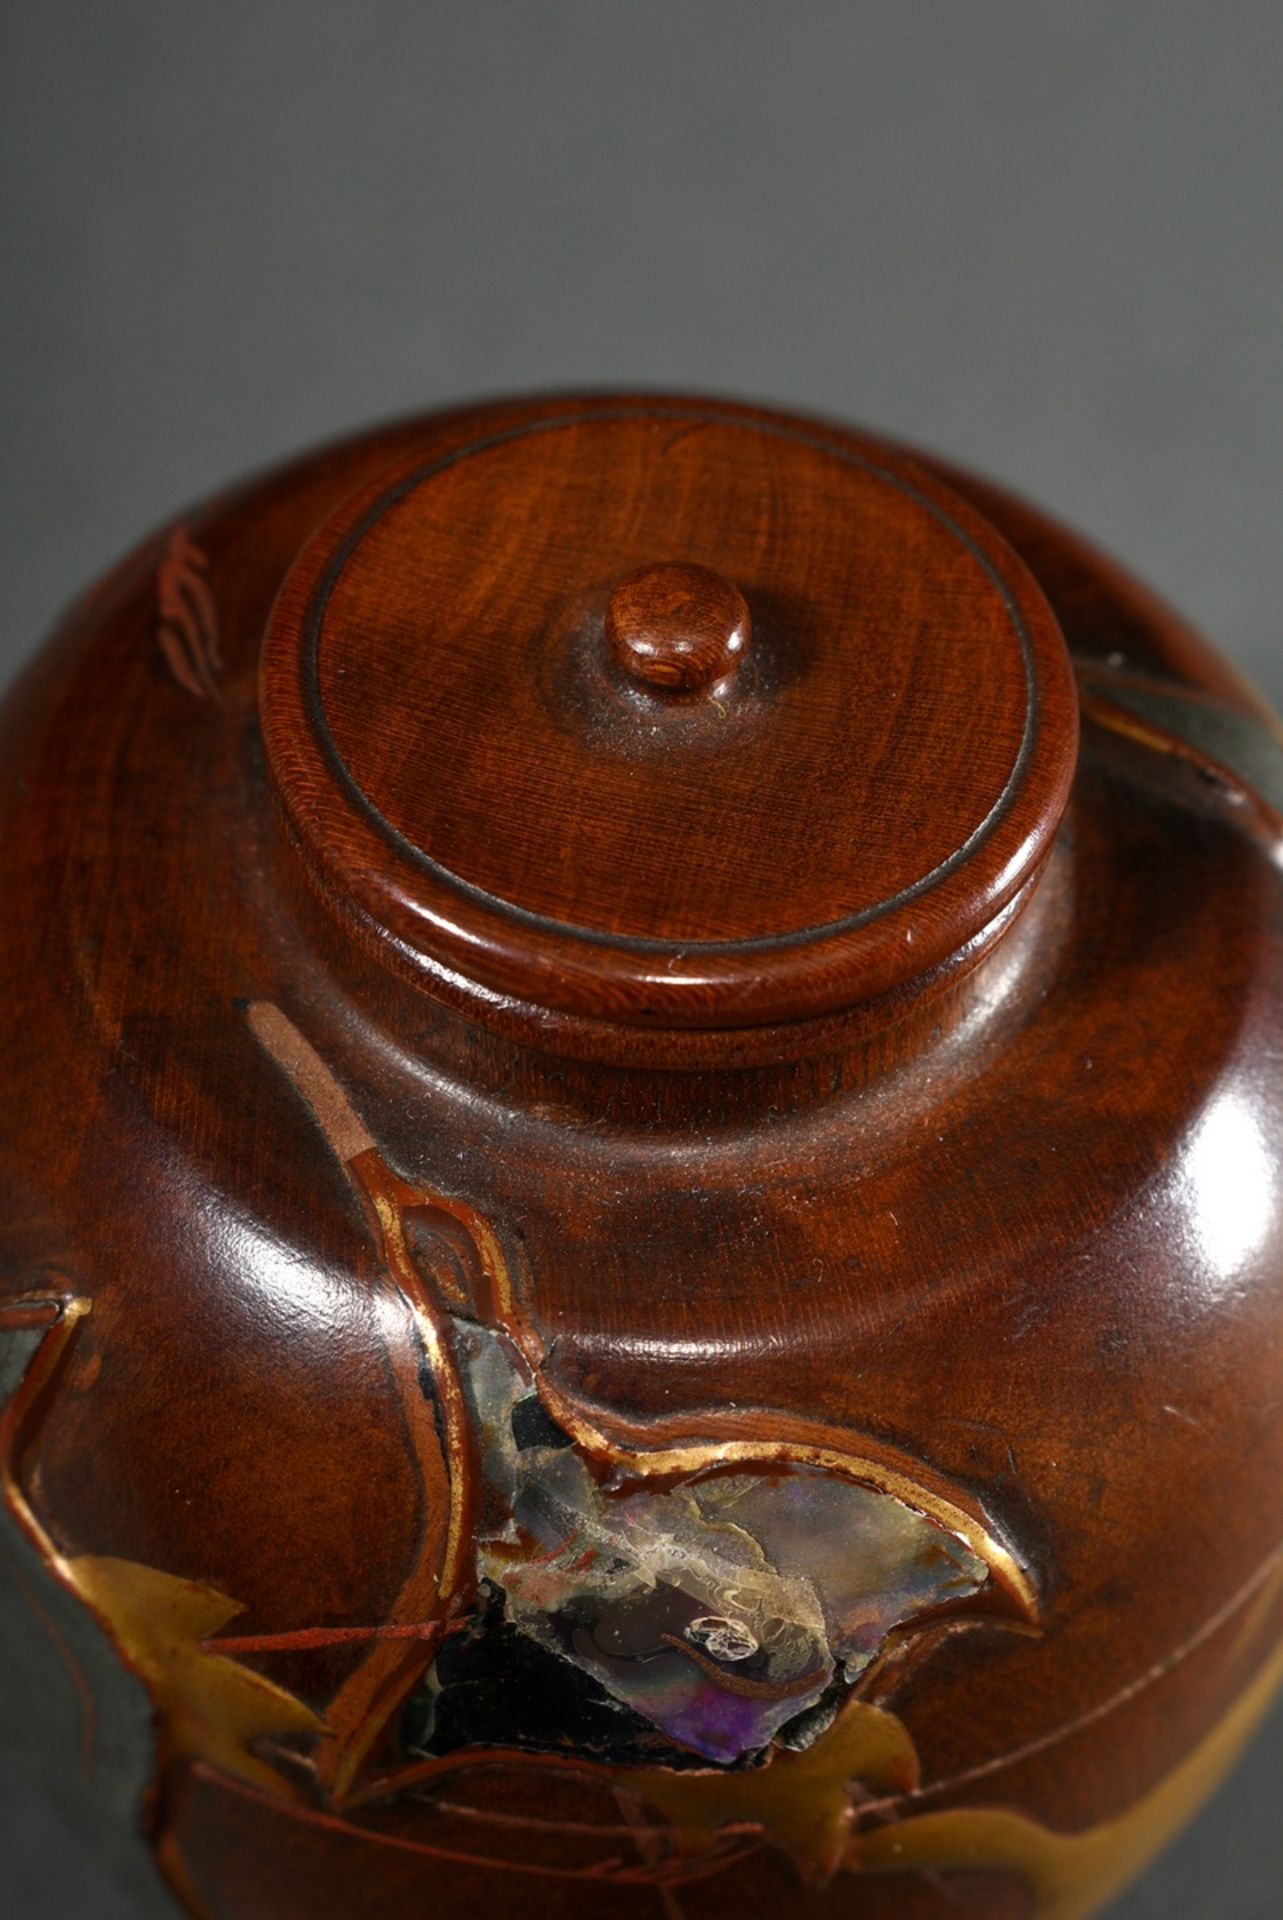 Japanese boxwood "Natsume" tea caddy with lacquer and mother-of-pearl inlays "7 Cranes", Meiji/Show - Image 5 of 6